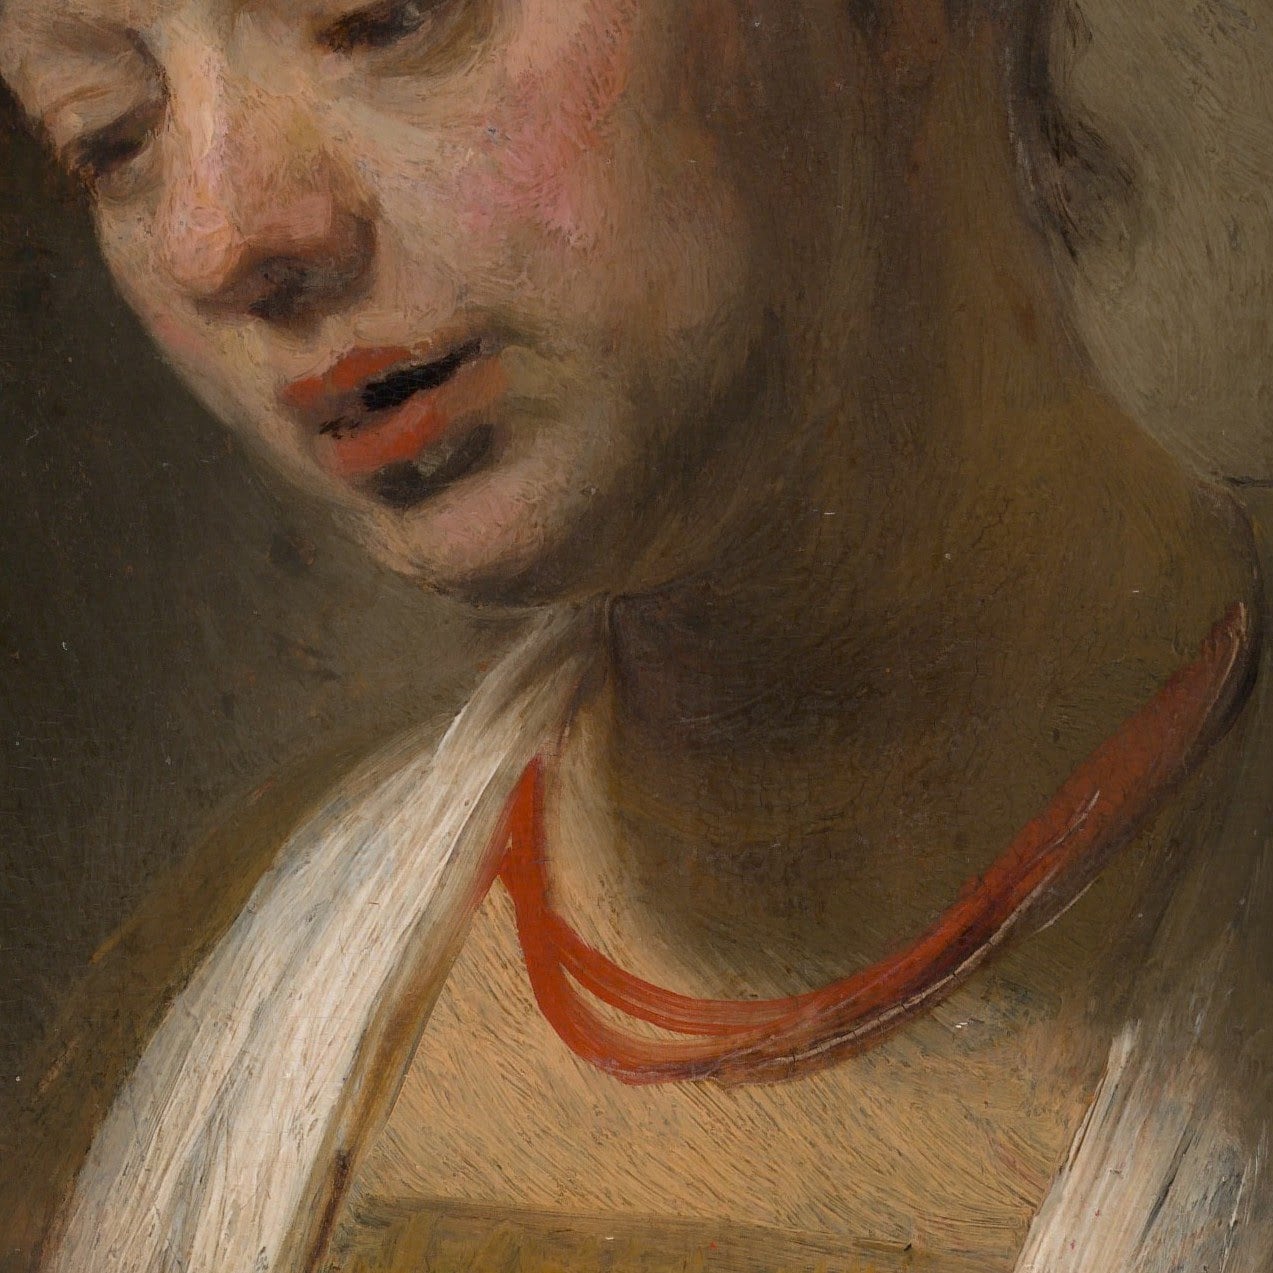 Young Woman with a Red Necklace by Rembrandt, 3d Printed with texture and brush strokes looks like original oil-painting, code:480